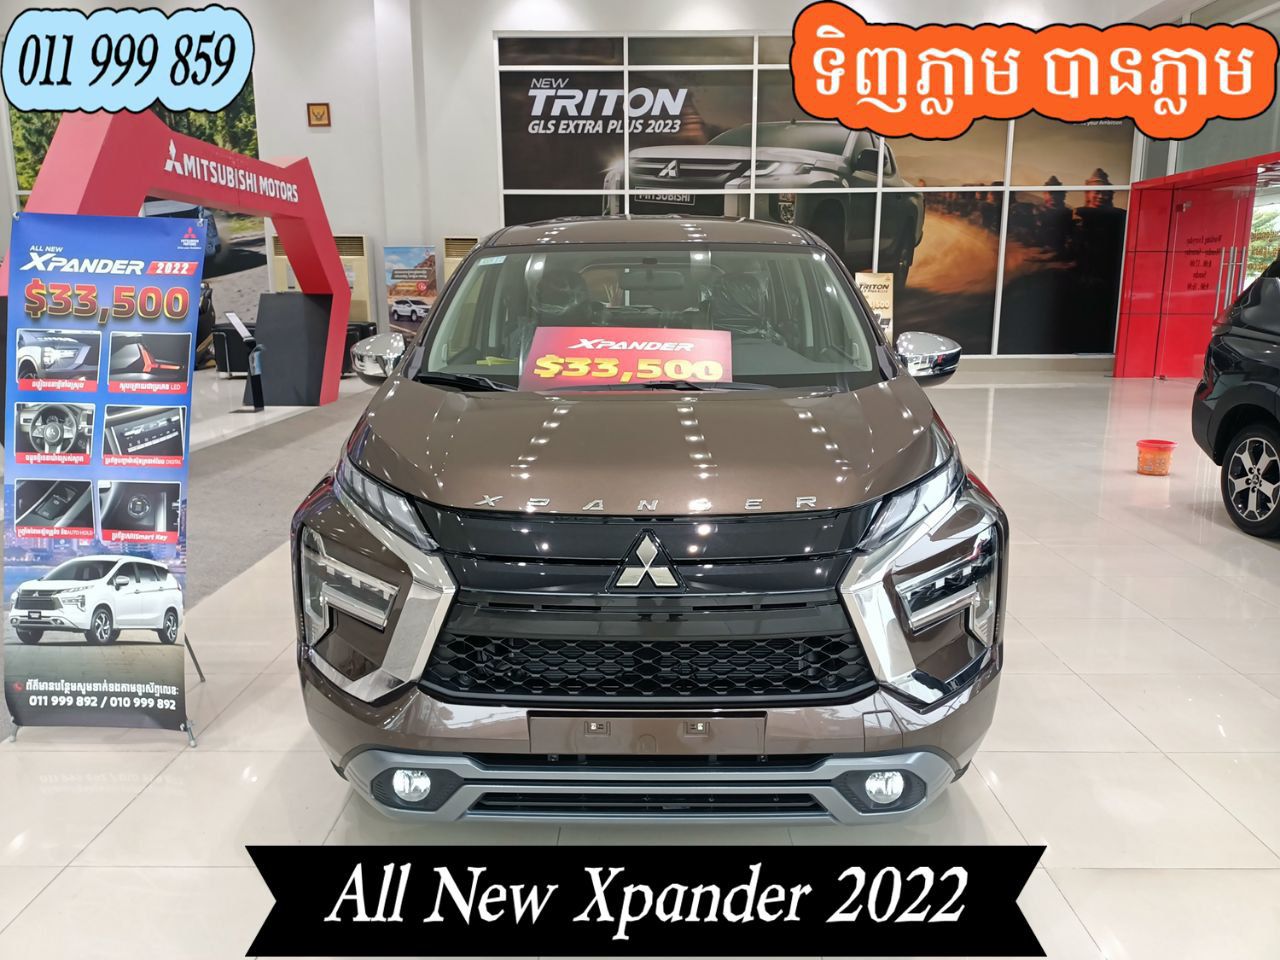 All New Xpander 2022